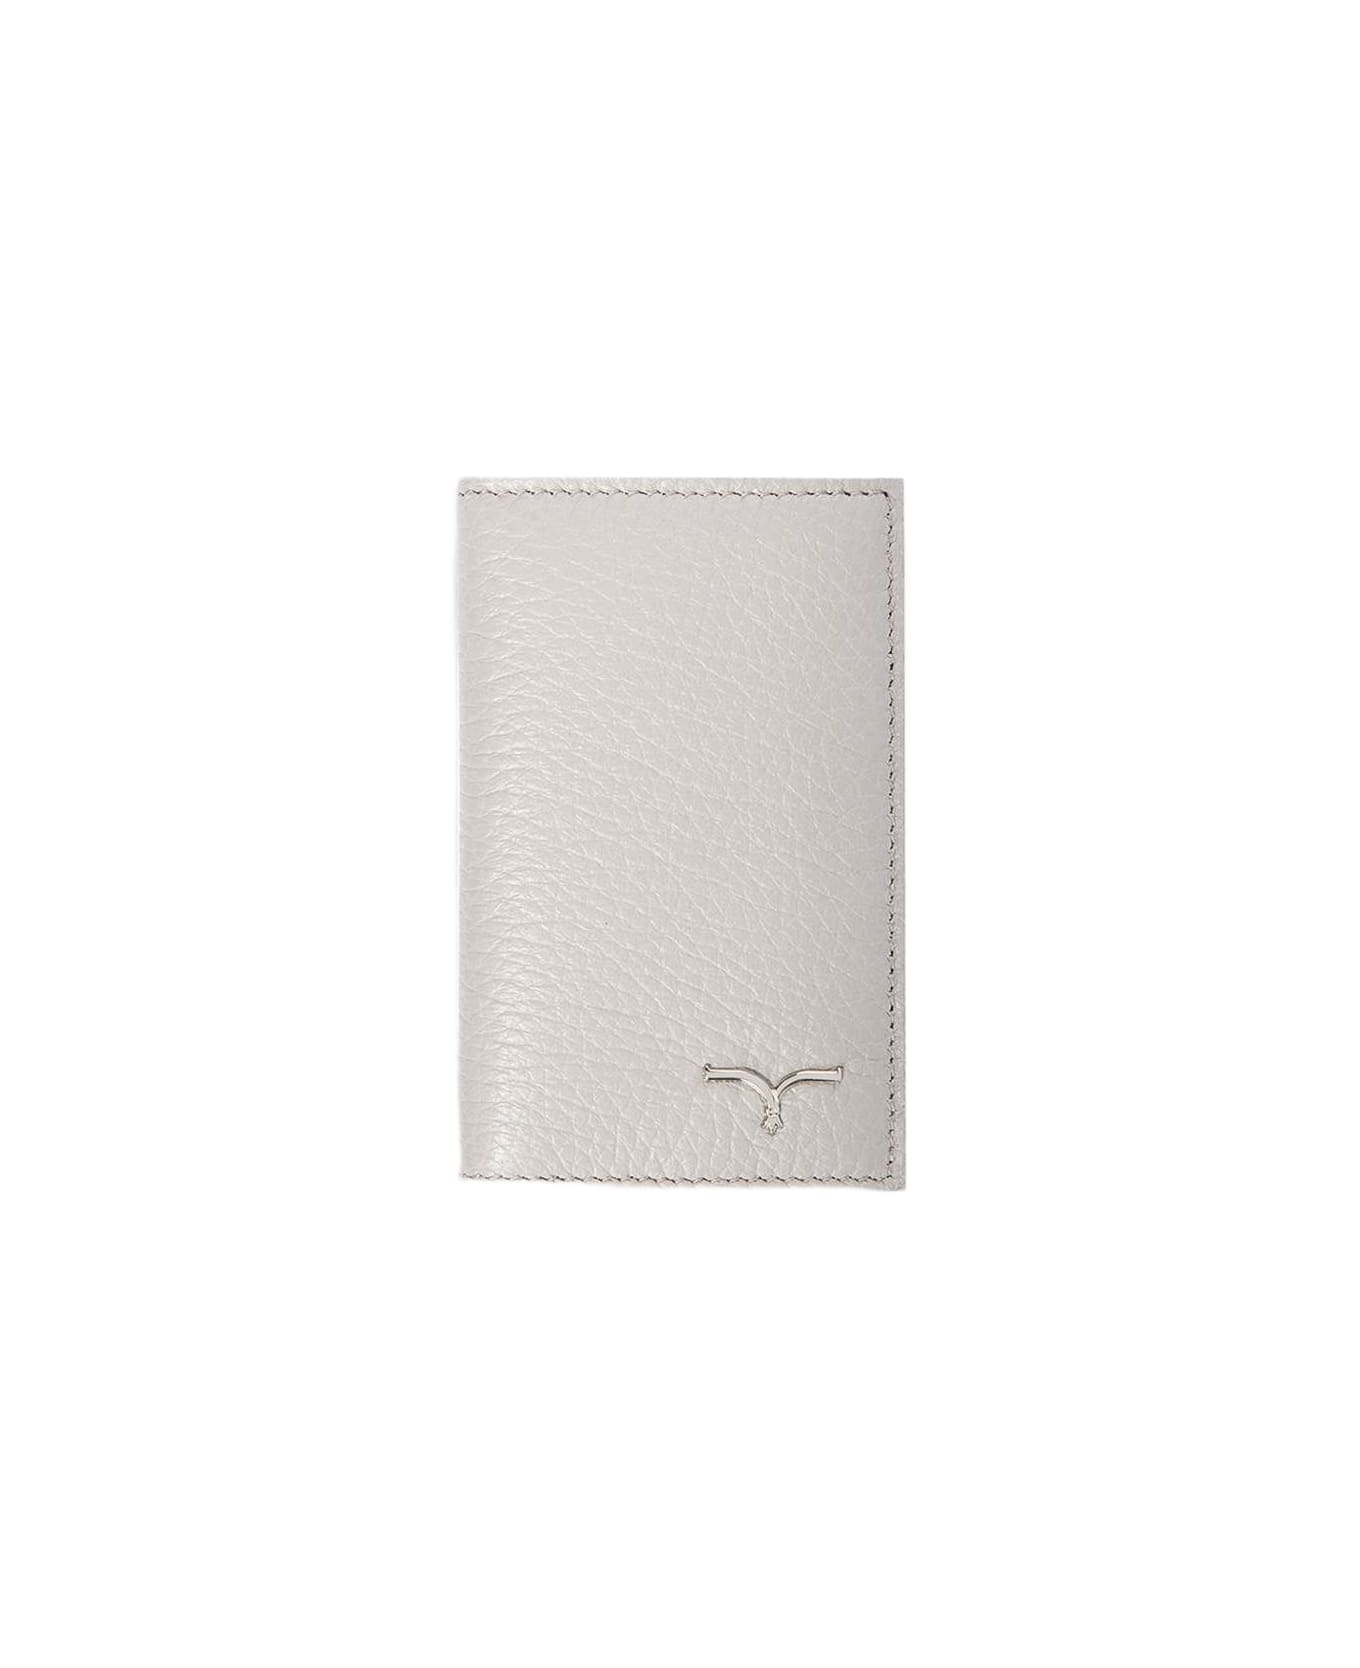 Larusmiani Card Holder 'amedeo' Wallet - DimGray 財布